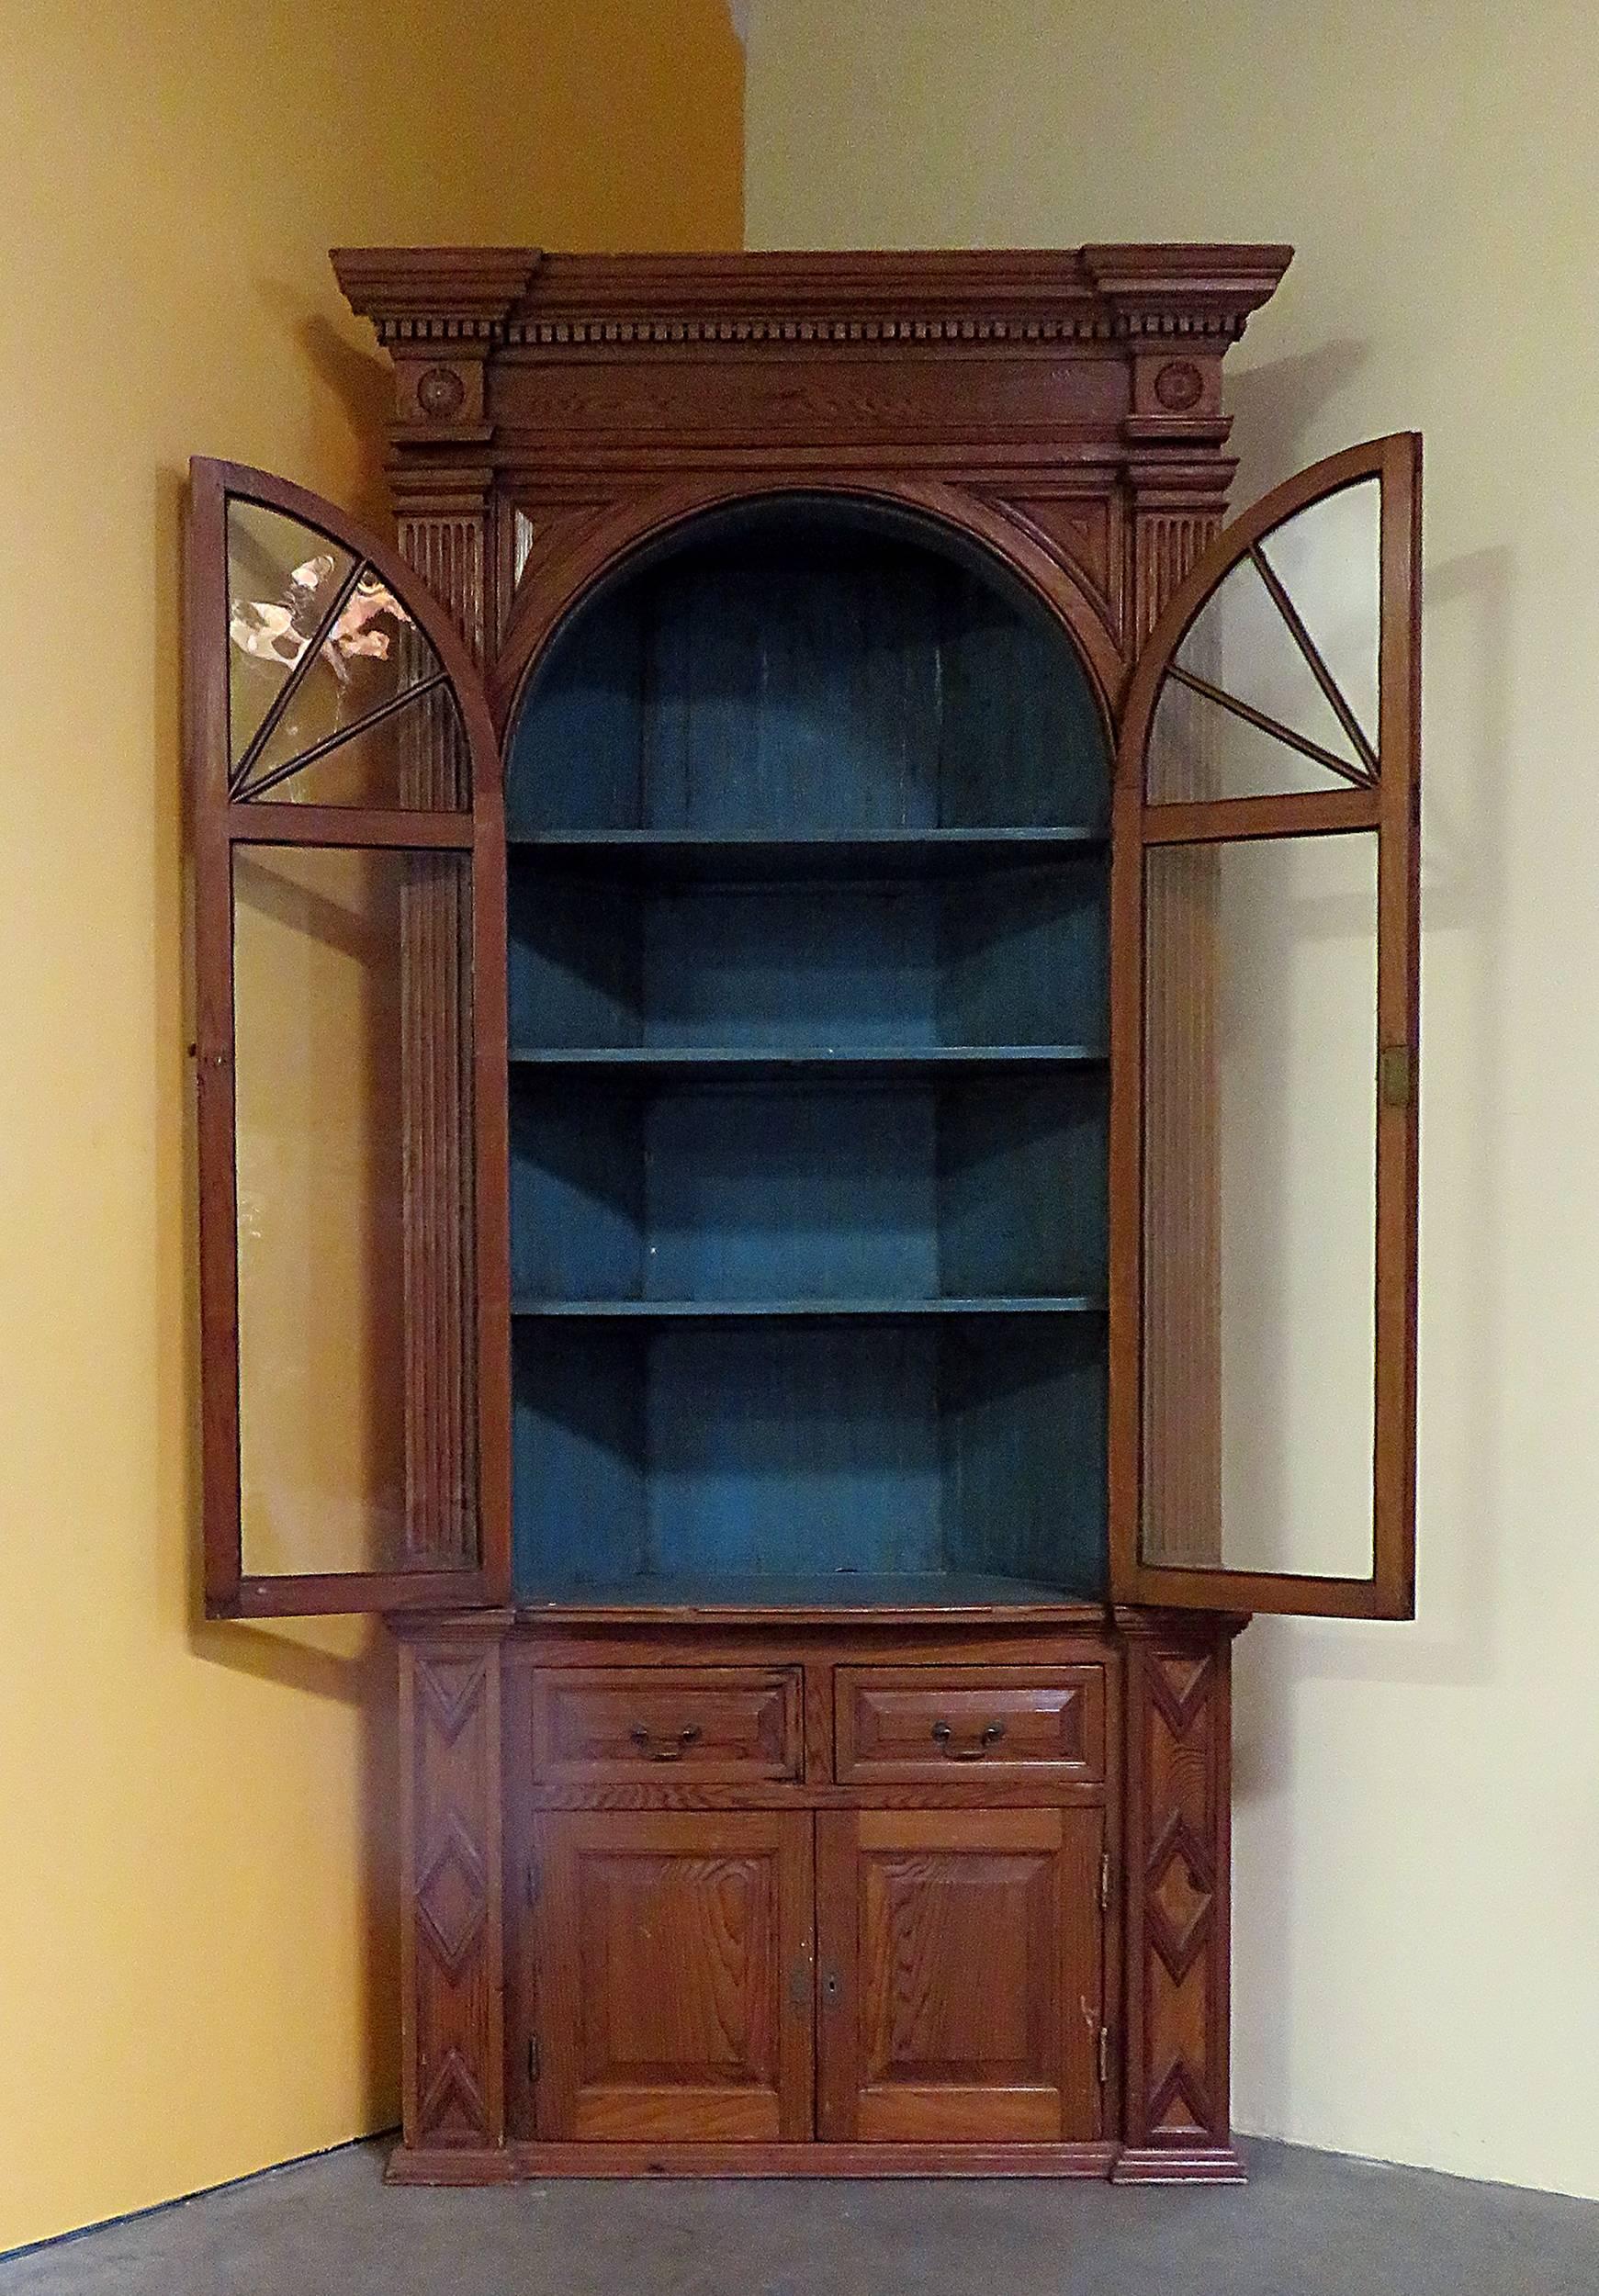 This large and handsome piece was formerly built in to a room. Made in England during the first half of the 19th century. Fantastic storage and great architectural detail. This cabinet is in one piece so it is probably best suited for 1st floor